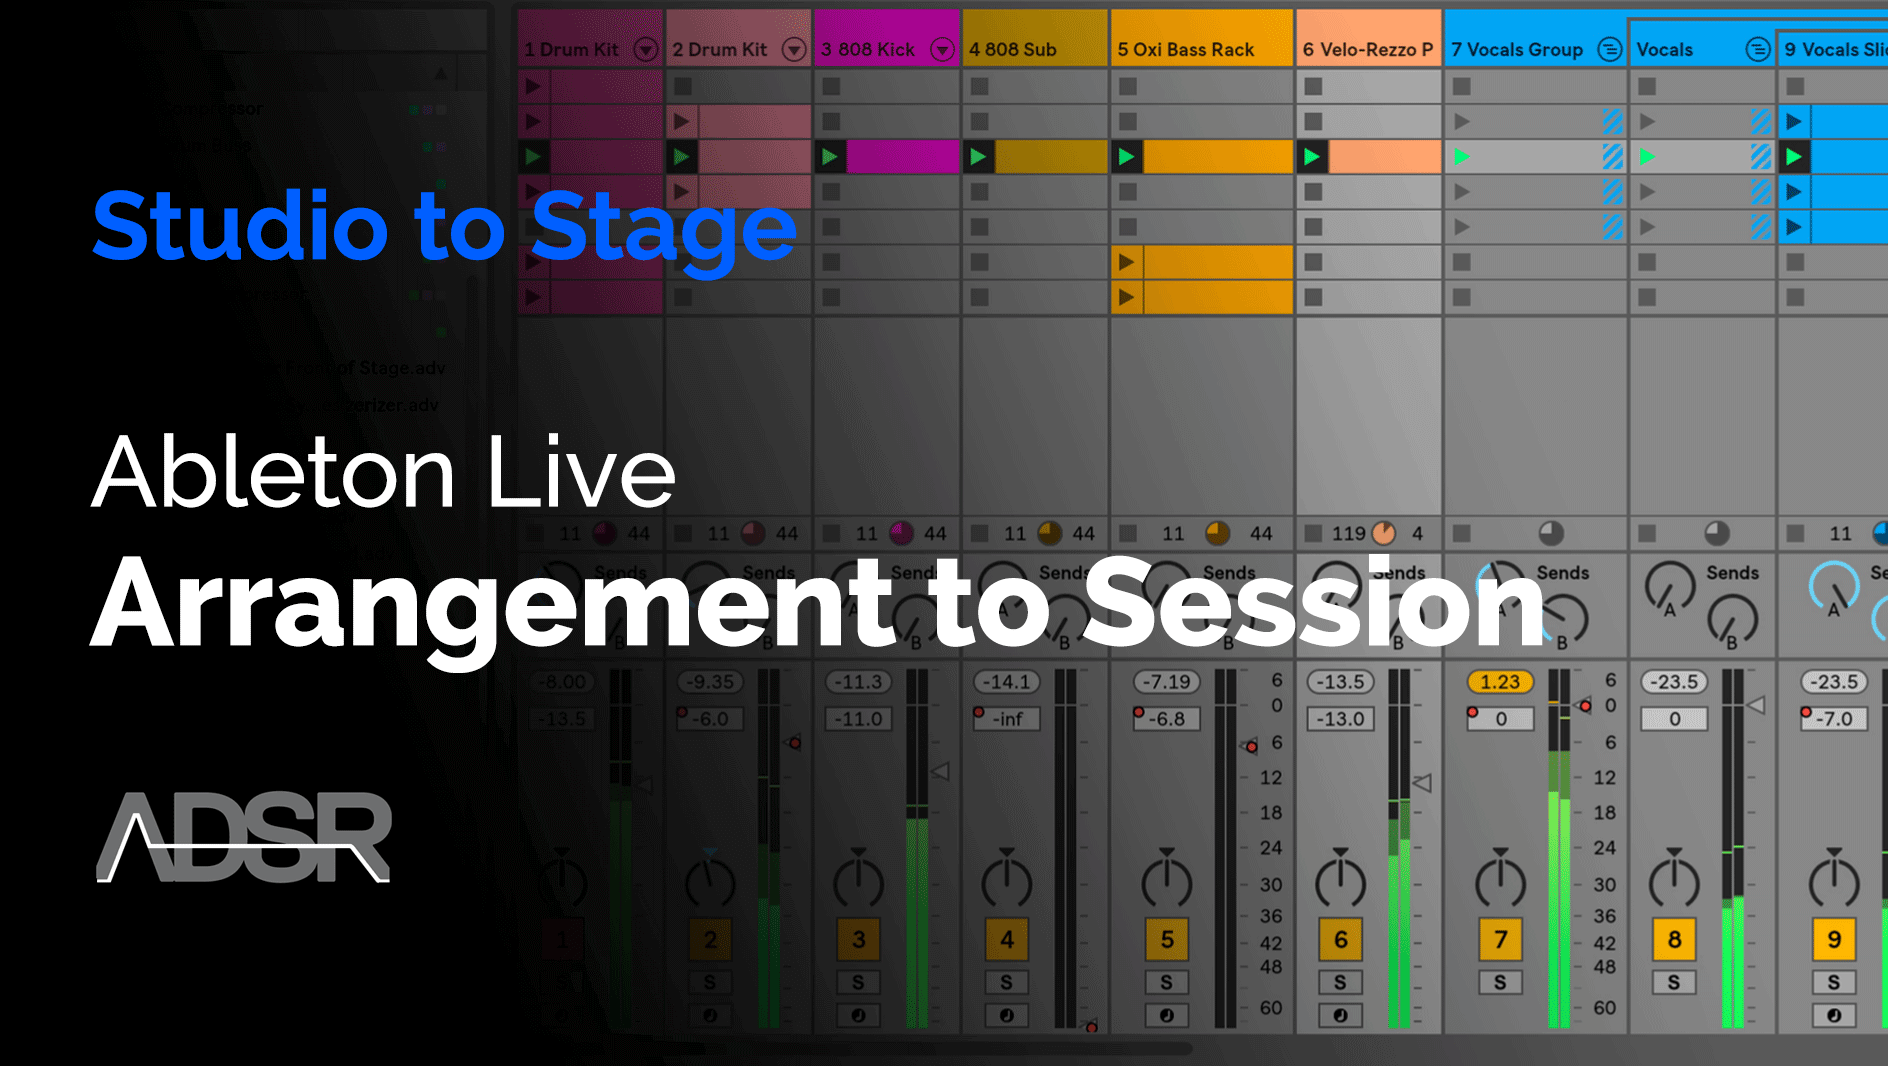 From Studio to Stage - From arrangement to Session